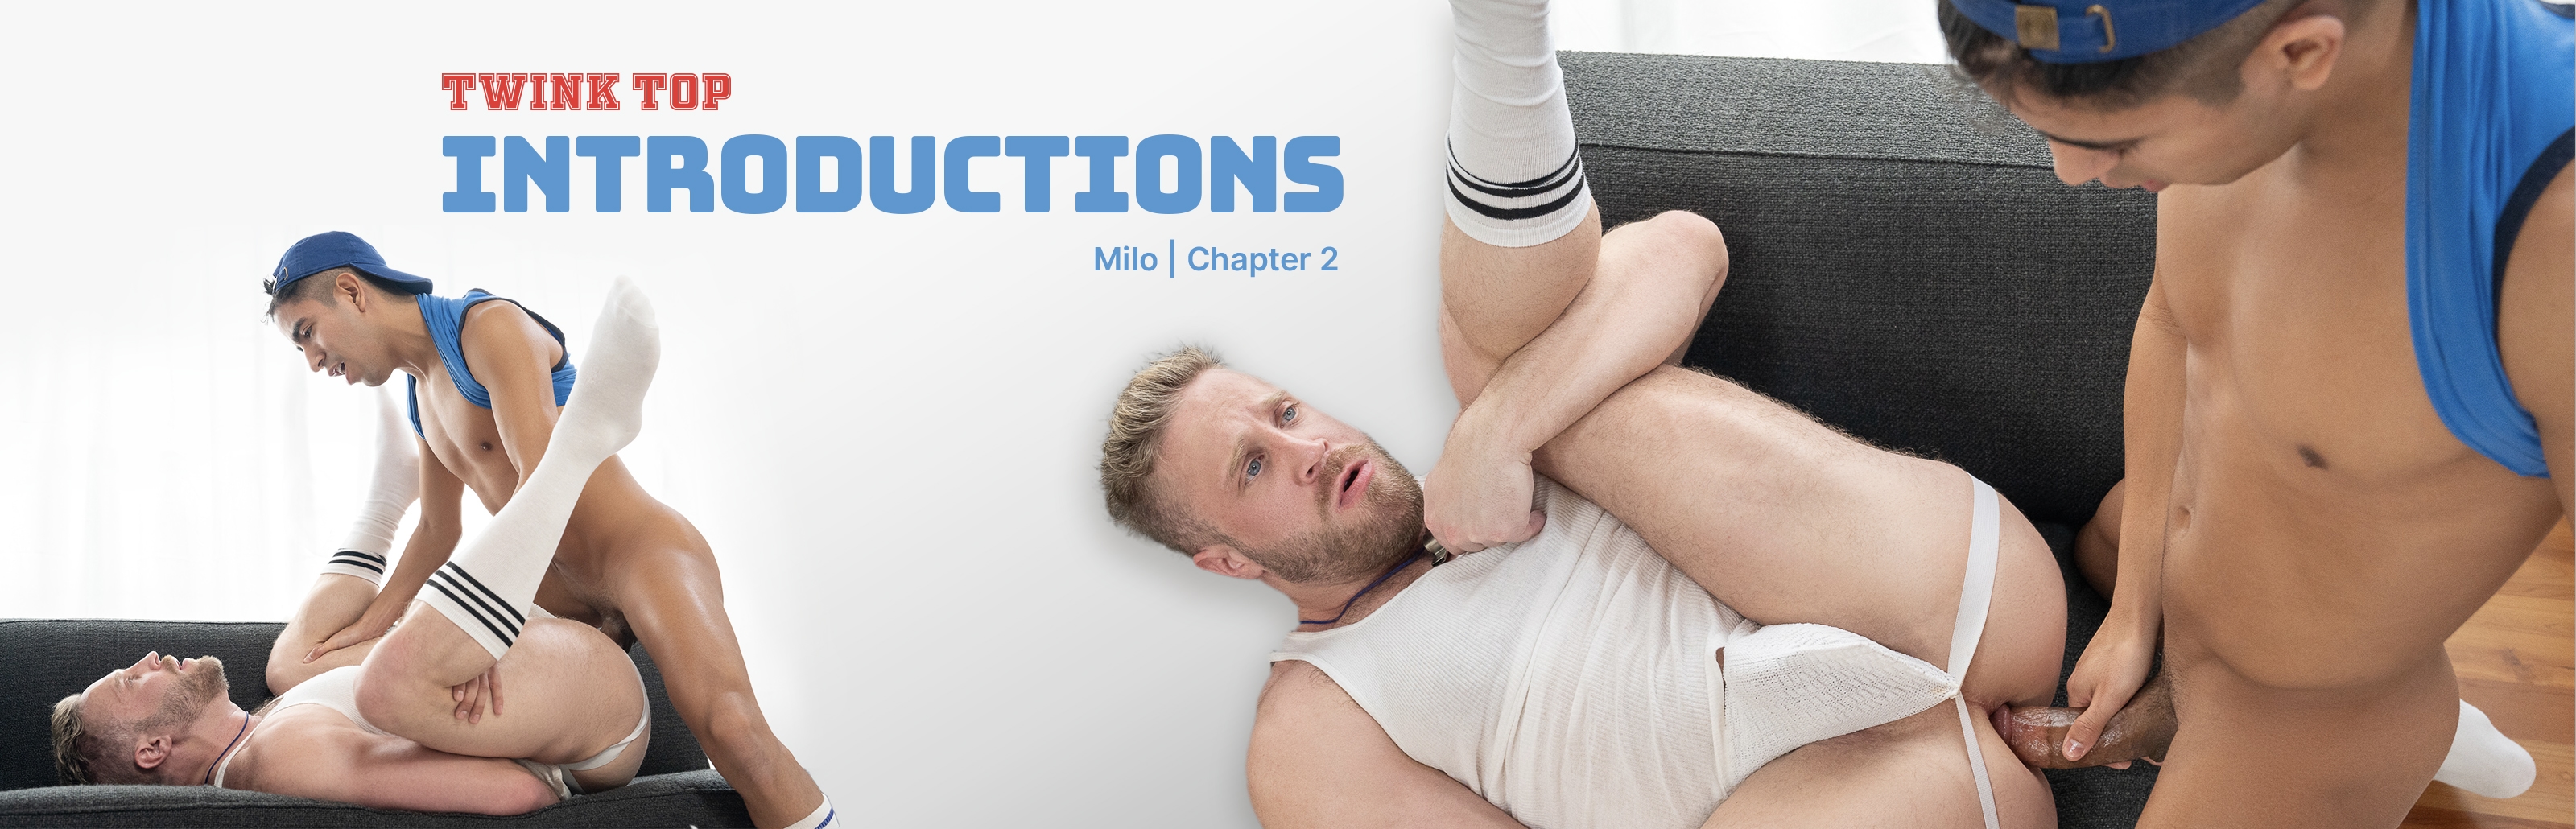 Introductions | MILO MILES | Chapter 10 Photos 97